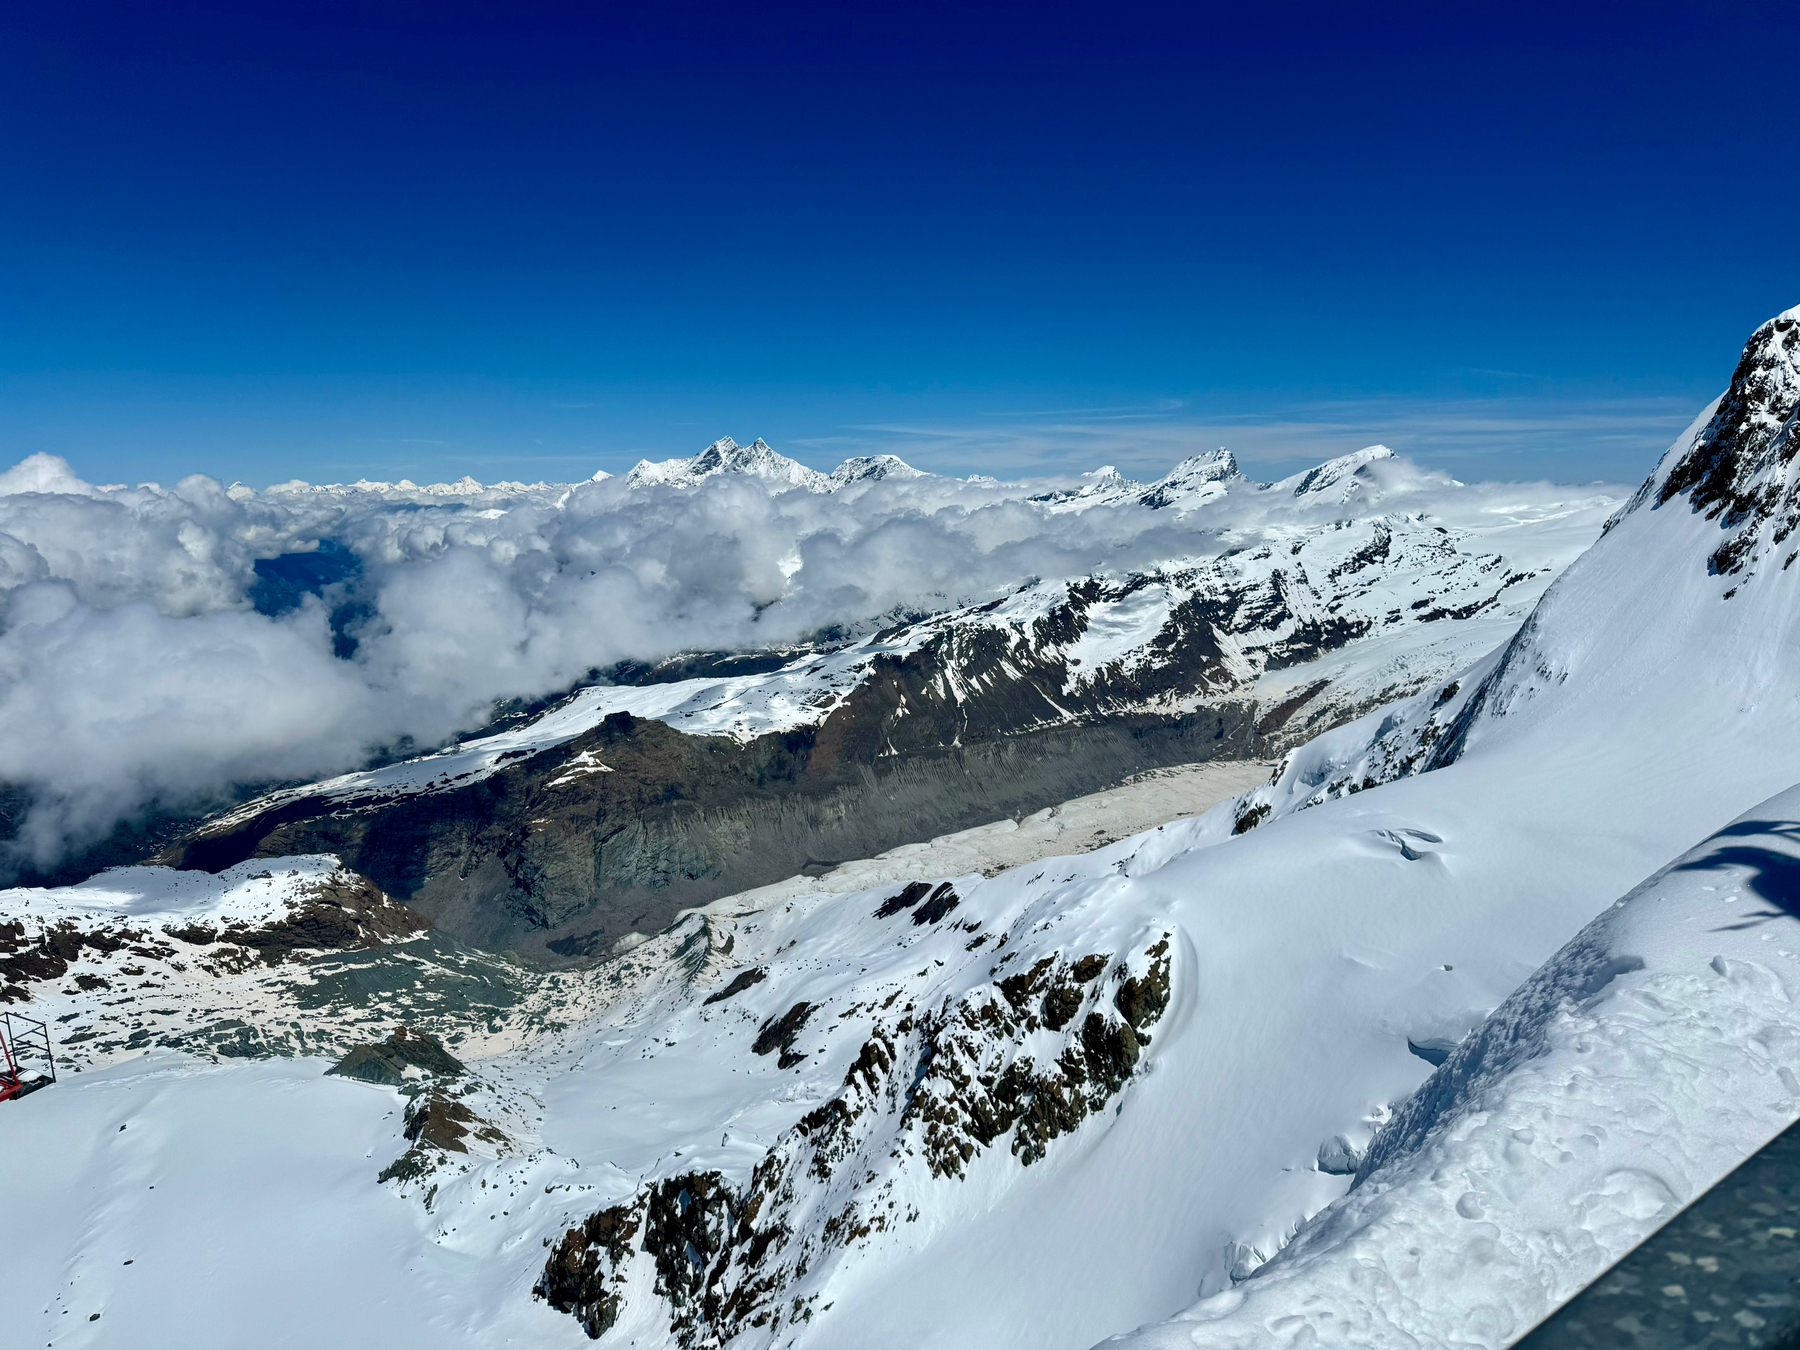 Snow-covered mountain peaks with clouds nestled in the valleys, under a clear blue sky.